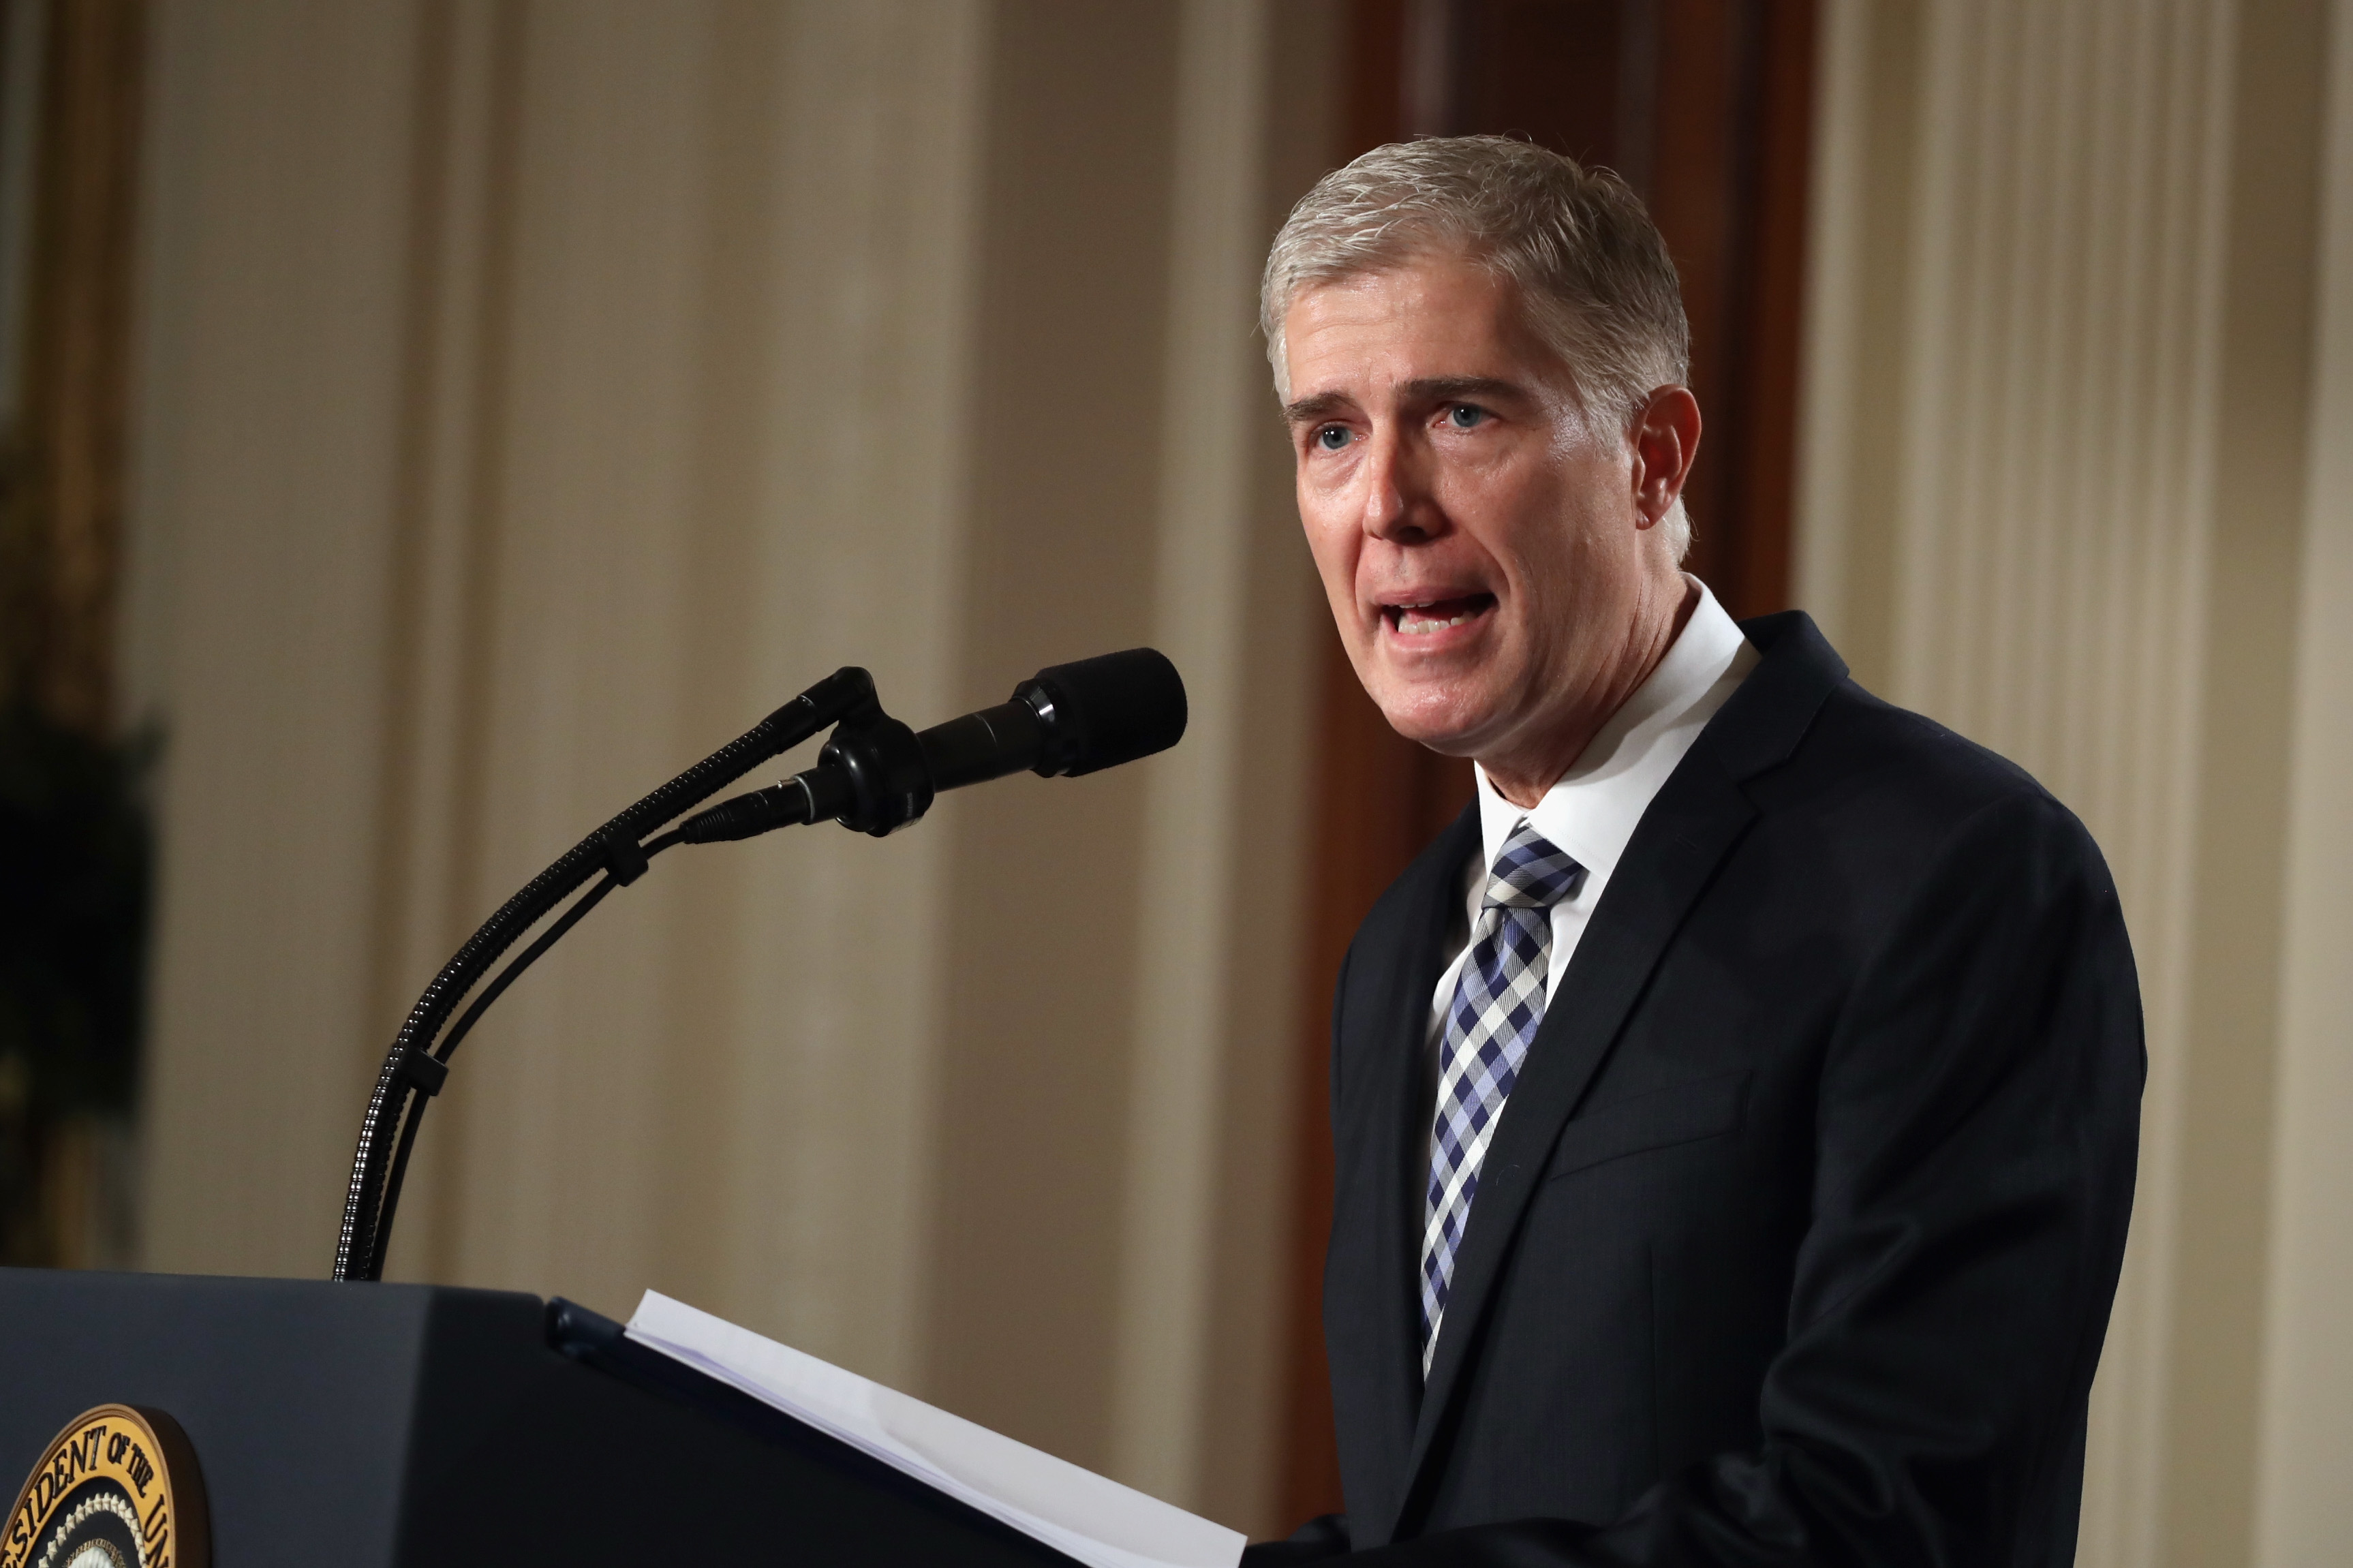 Judge Neil Gorsuch delivers brief remarks after being nominated by U.S. President Donald Trump to the Supreme Court, on Jan. 31, 2017. (Chip Somodevilla—Getty Images)